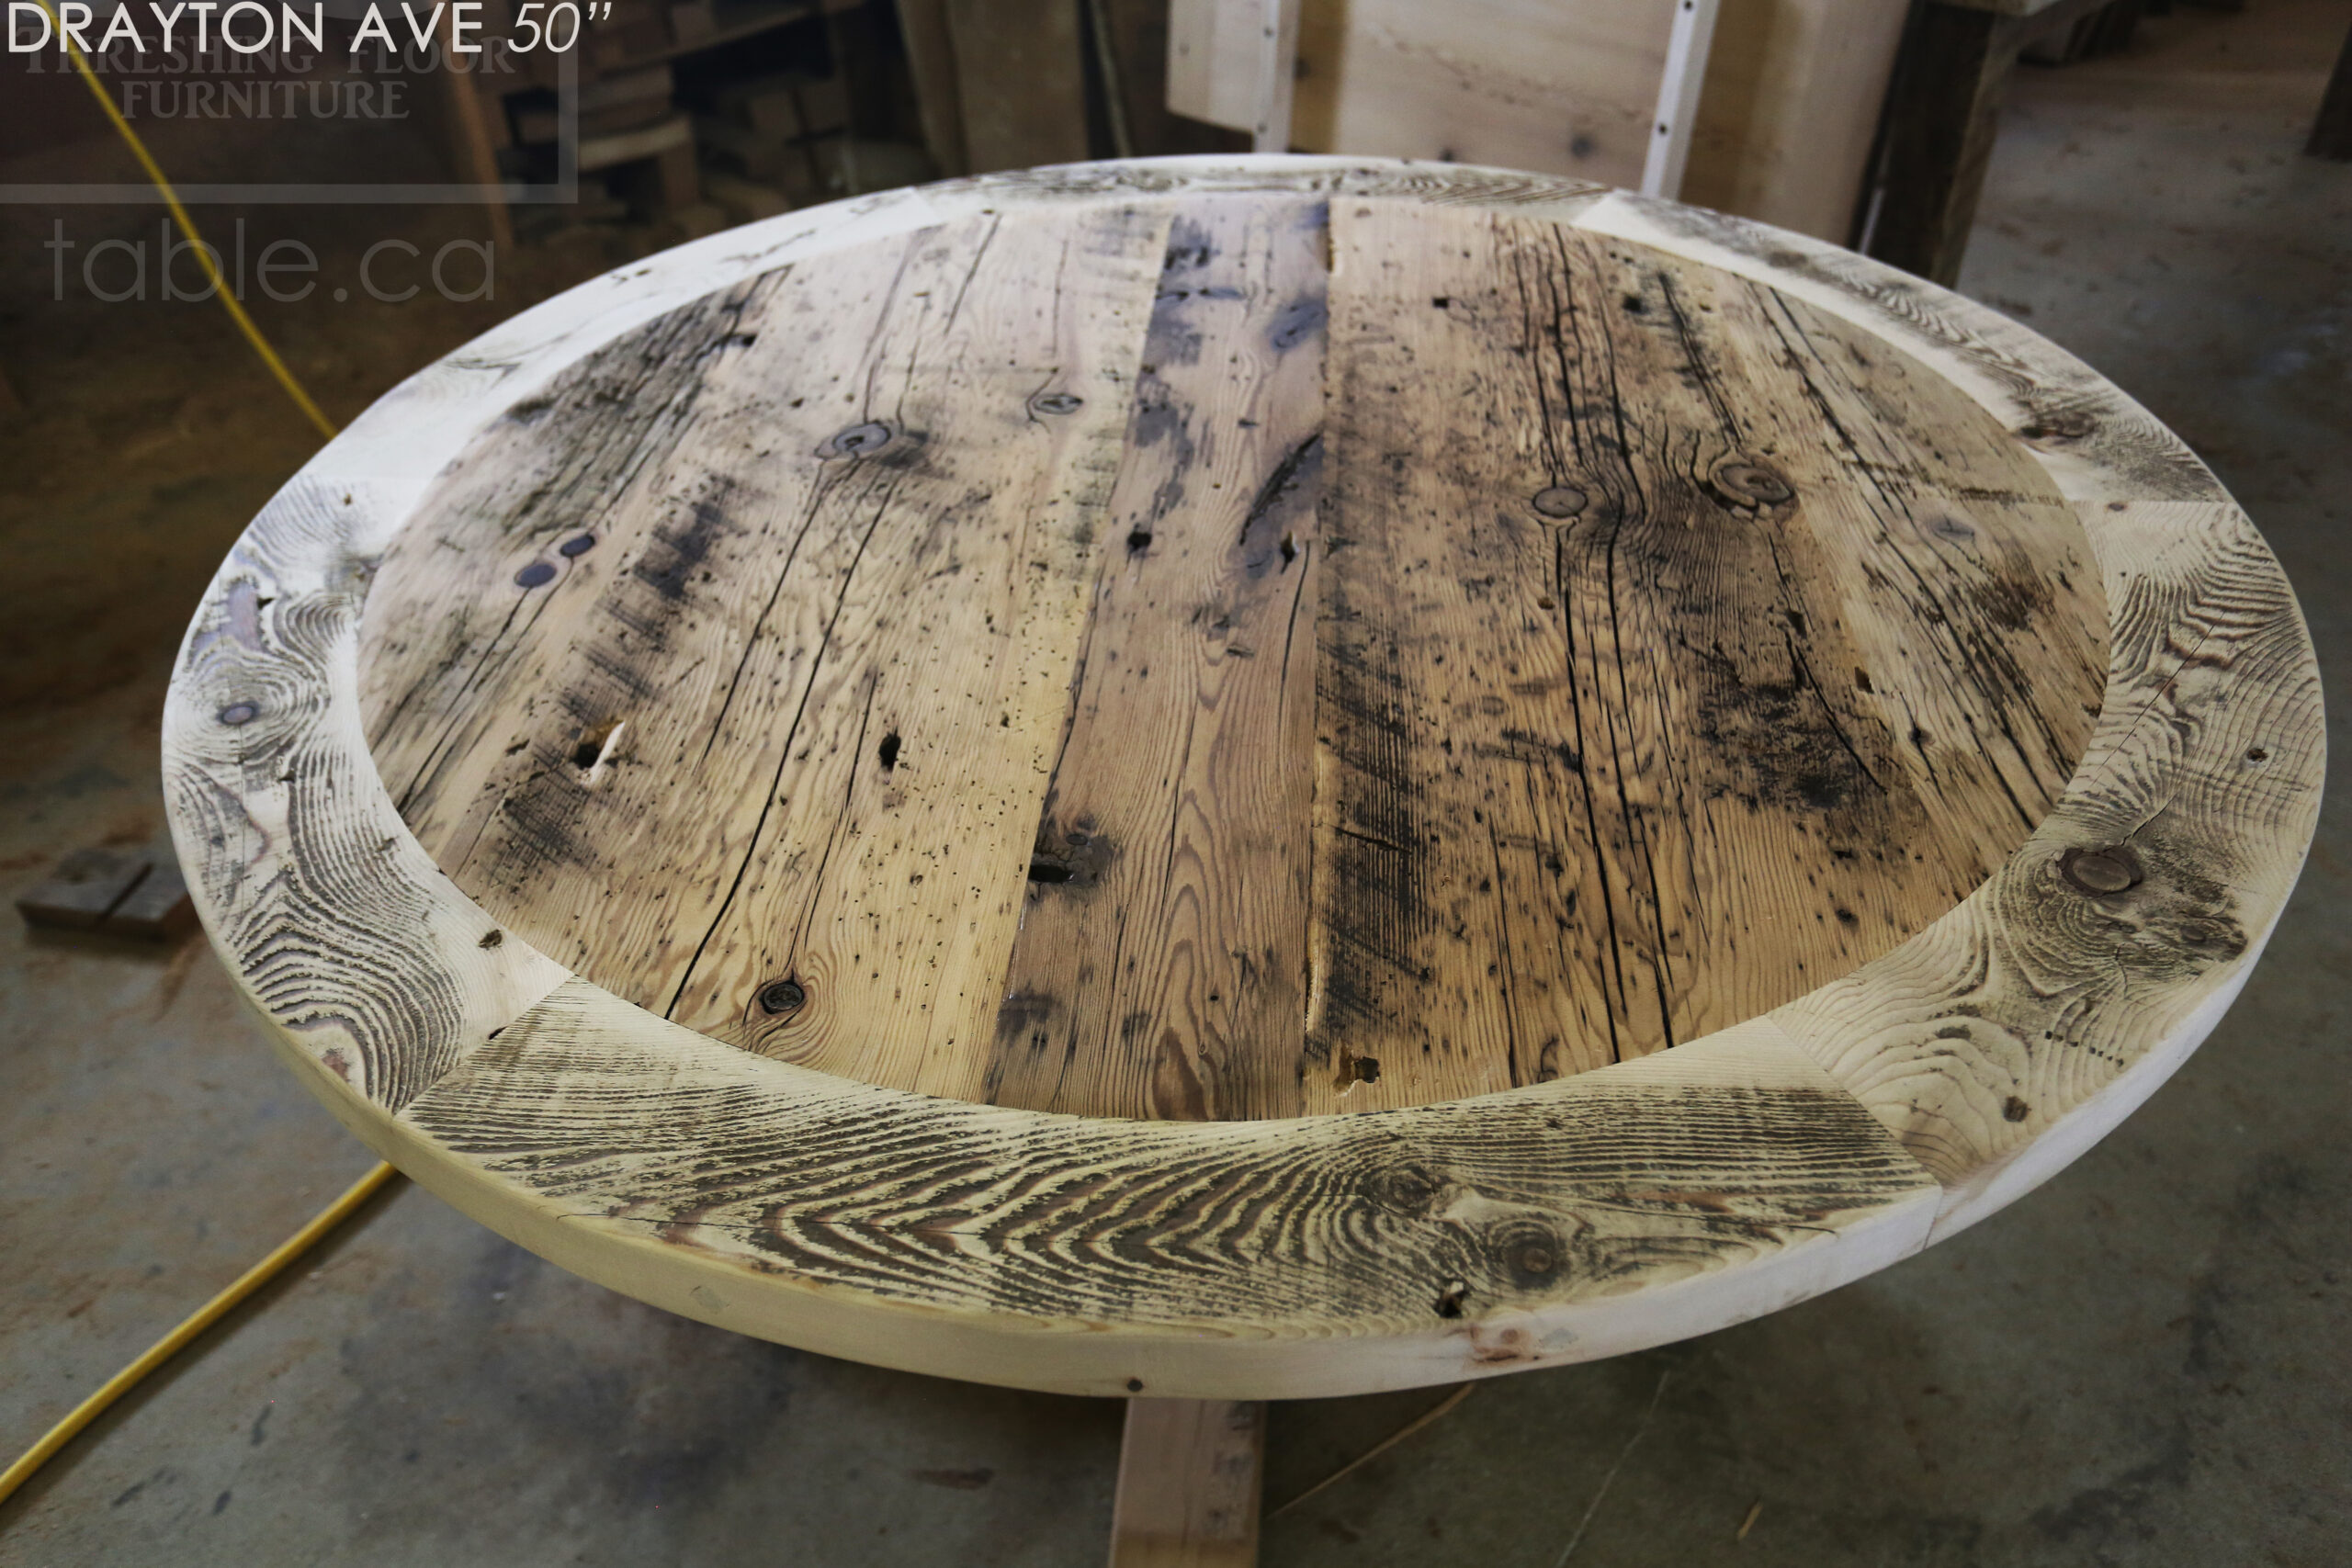 50" Ontario Barnwood Round Table we made for an Toronto, Ontario home - Round Cedar Hydro Pole Base - 2" Hemlock Threshing Floor Top -  Original edges & distressing maintained - Greytone Treatment Option [maintains the light colour of unfinished] - Premium epoxy + matte polyurethane finish - www.table.ca